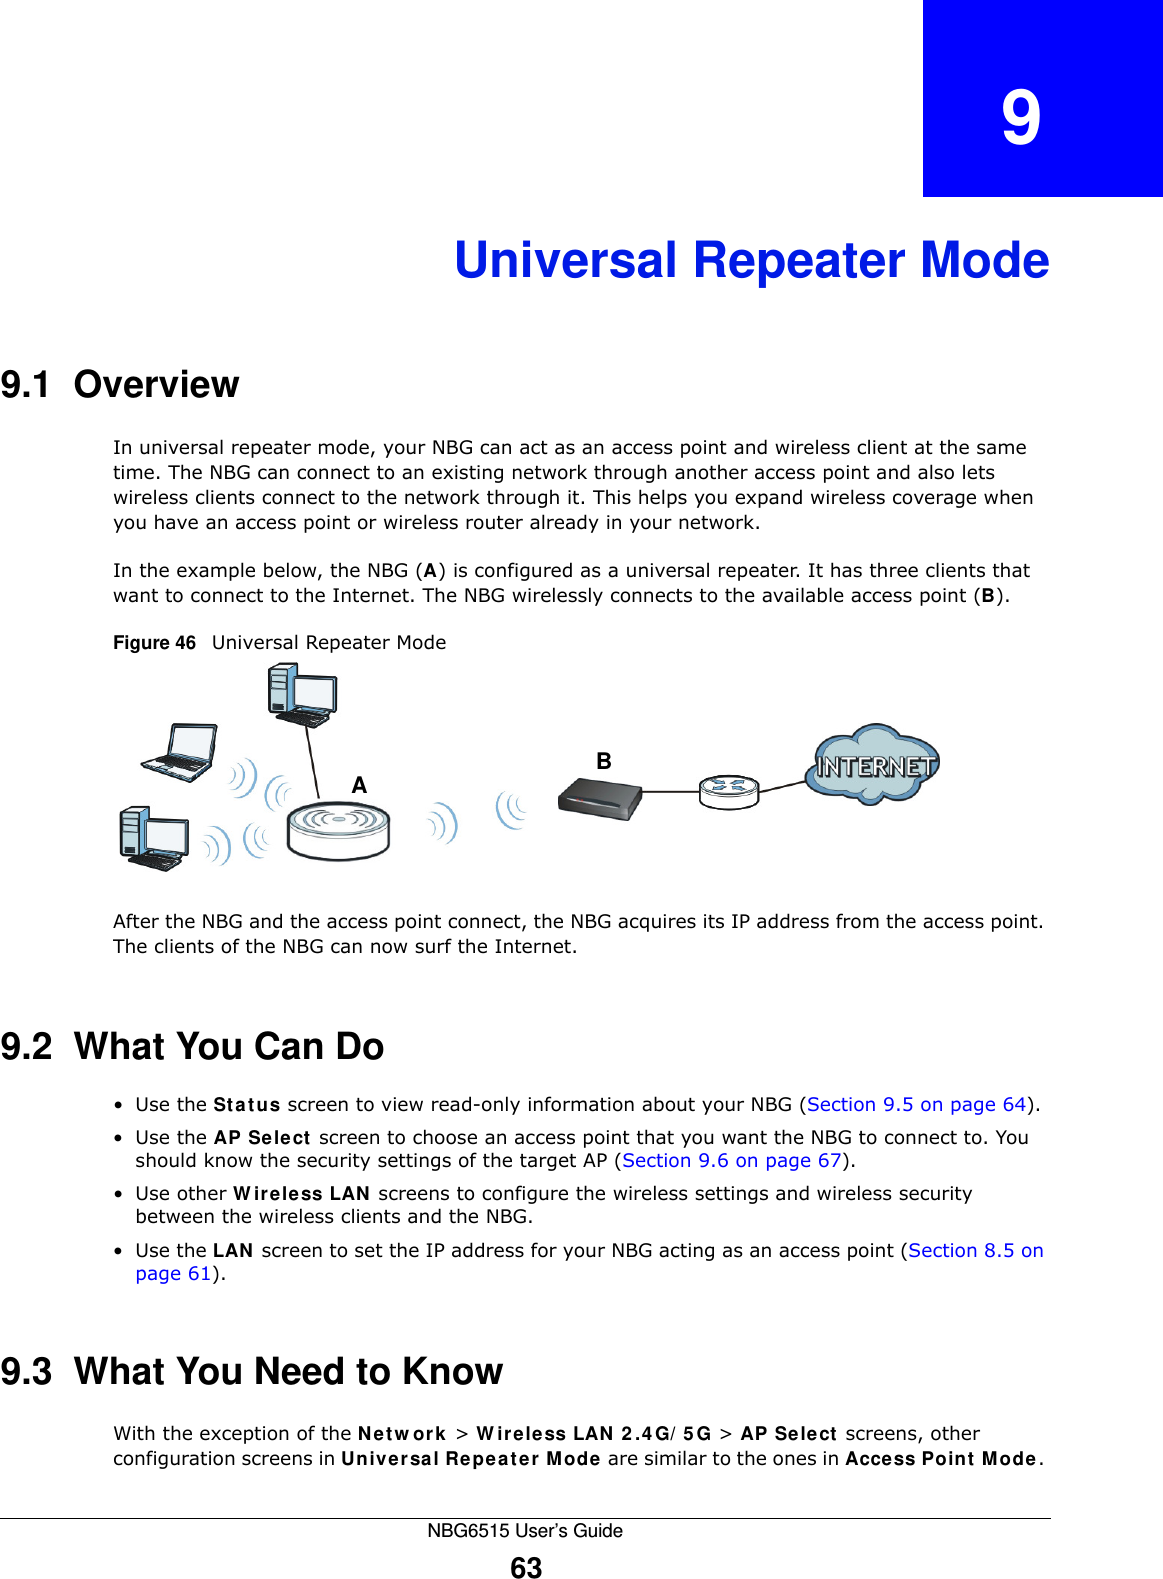 NBG6515 User’s Guide63CHAPTER   9Universal Repeater Mode9.1  OverviewIn universal repeater mode, your NBG can act as an access point and wireless client at the same time. The NBG can connect to an existing network through another access point and also lets wireless clients connect to the network through it. This helps you expand wireless coverage when you have an access point or wireless router already in your network.In the example below, the NBG (A) is configured as a universal repeater. It has three clients that want to connect to the Internet. The NBG wirelessly connects to the available access point (B). Figure 46   Universal Repeater ModeAfter the NBG and the access point connect, the NBG acquires its IP address from the access point. The clients of the NBG can now surf the Internet. 9.2  What You Can Do•Use the Status screen to view read-only information about your NBG (Section 9.5 on page 64).•Use the AP Select screen to choose an access point that you want the NBG to connect to. You should know the security settings of the target AP (Section 9.6 on page 67).•Use other Wireless LAN screens to configure the wireless settings and wireless security between the wireless clients and the NBG.•Use the LAN screen to set the IP address for your NBG acting as an access point (Section 8.5 on page 61).9.3  What You Need to KnowWith the exception of the Network &gt; Wireless LAN 2.4G/5G &gt; AP Select screens, other configuration screens in Universal Repeater Mode are similar to the ones in Access Point Mode. AB